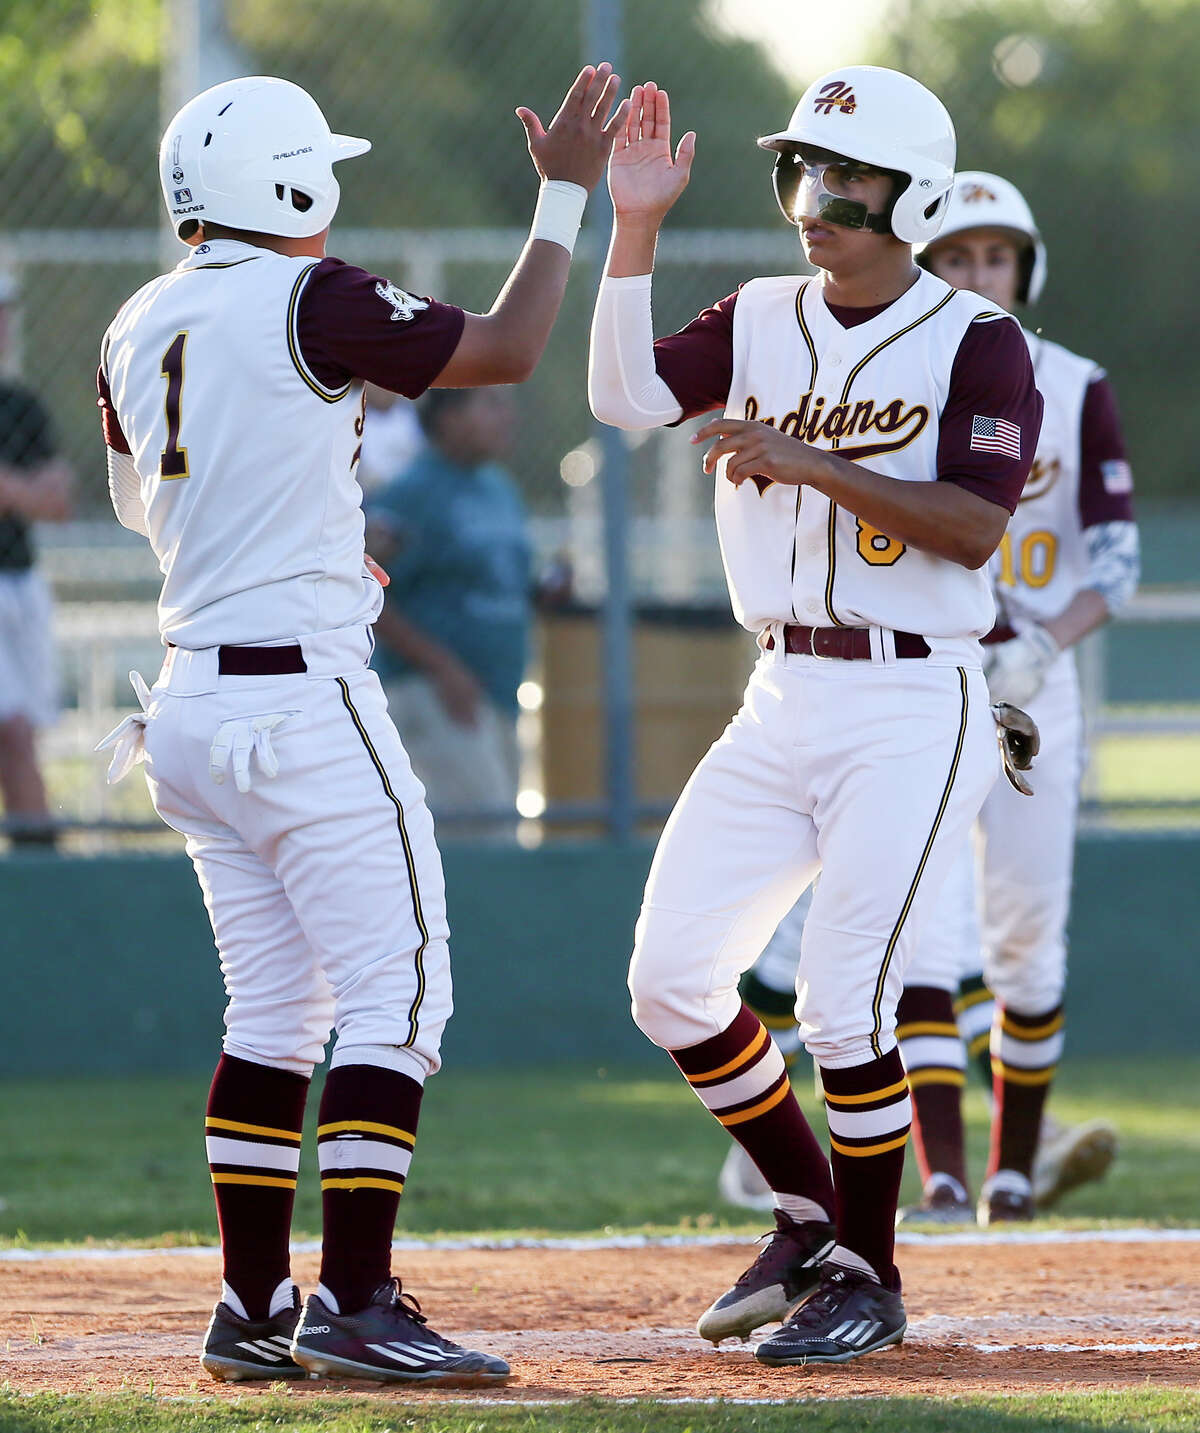 Harlandale’s Timothy Smith (left) congratu lates Shawn Tober after they scored in the first inning of their 8-2 win over District 28-5A rival McCollum on March 31. Harlandale, McCollum and Highlands were tied at first with 7-1 records through the first round of district play.